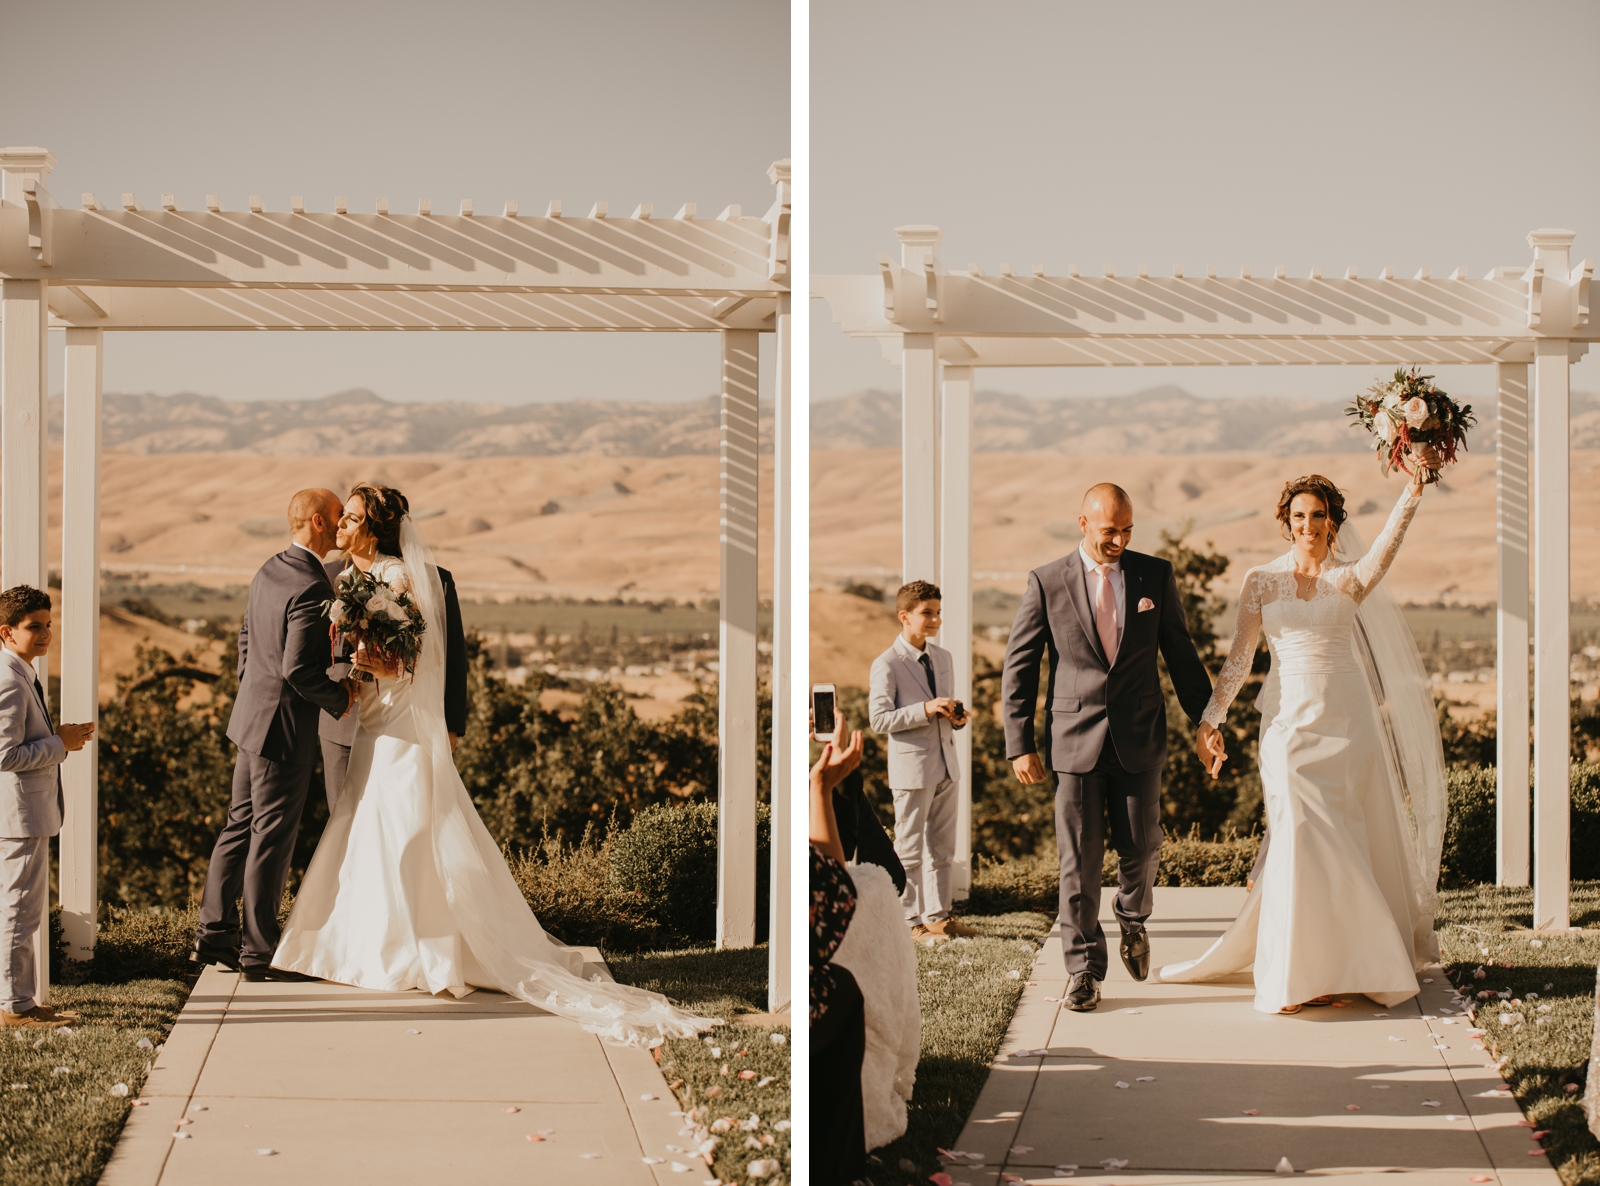 Wedding ceremony at Willow Heights Mansion | Juju Photography - California Wedding Photographer